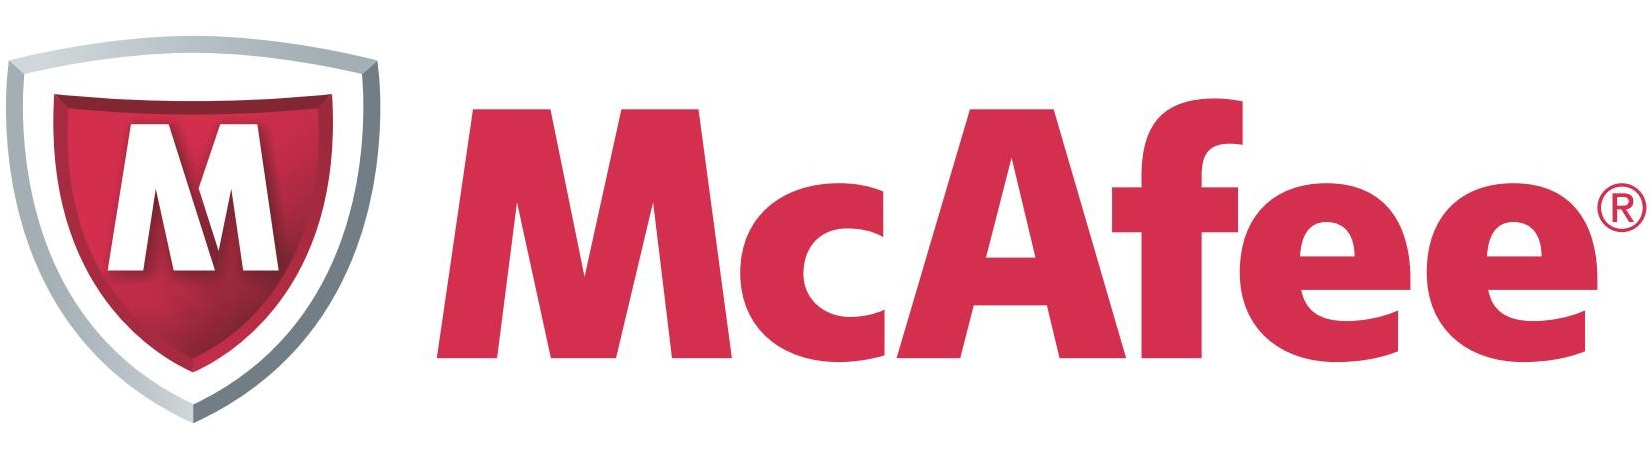 McAfee by Intel Global Threat Intelligence Enterprise Security Manager (ESM) Module - Subscription Licence - 1 Appliance - 1 Year